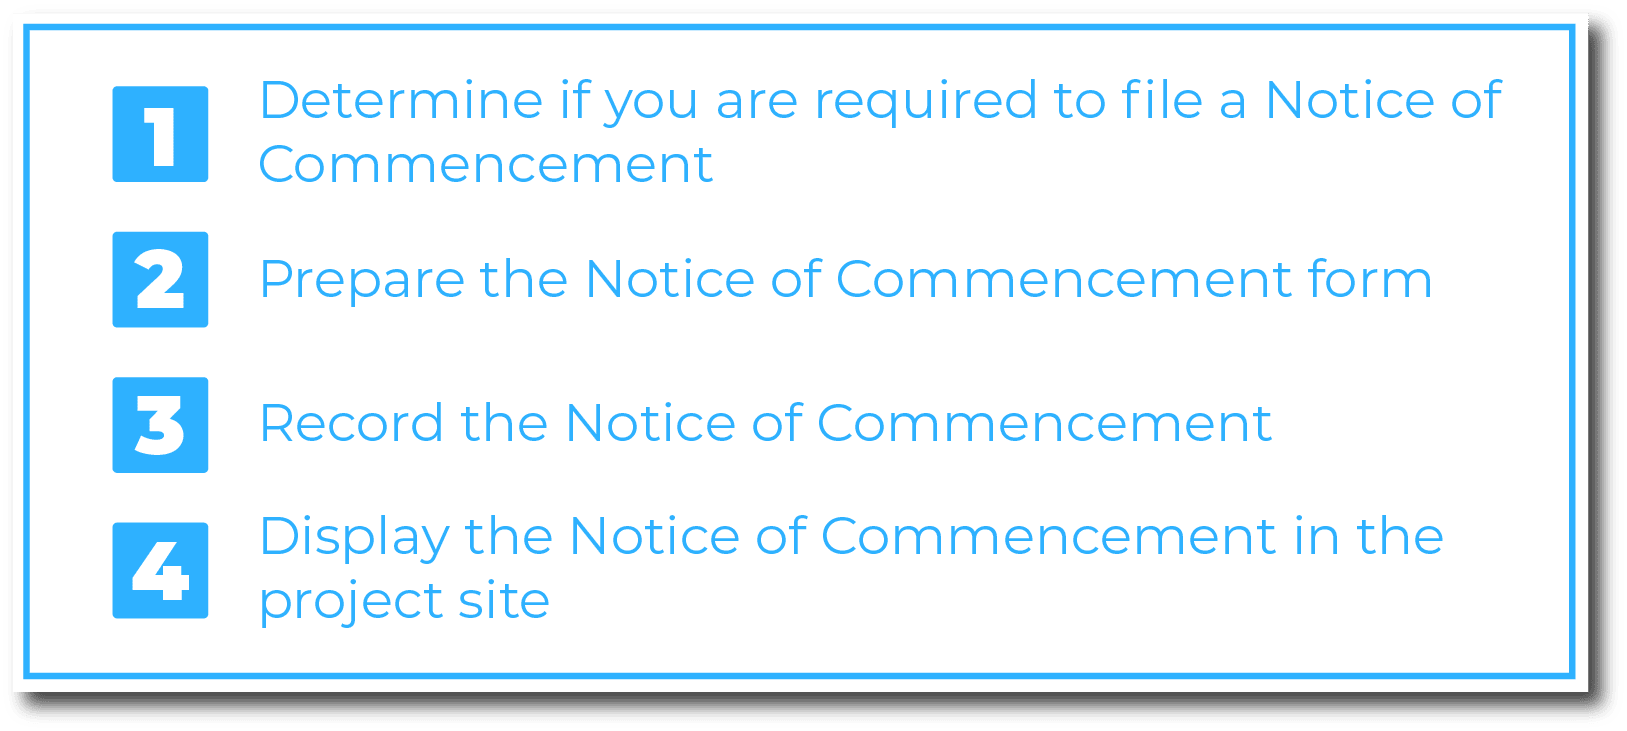 How to file a Notice of Commencement in non-residential projects